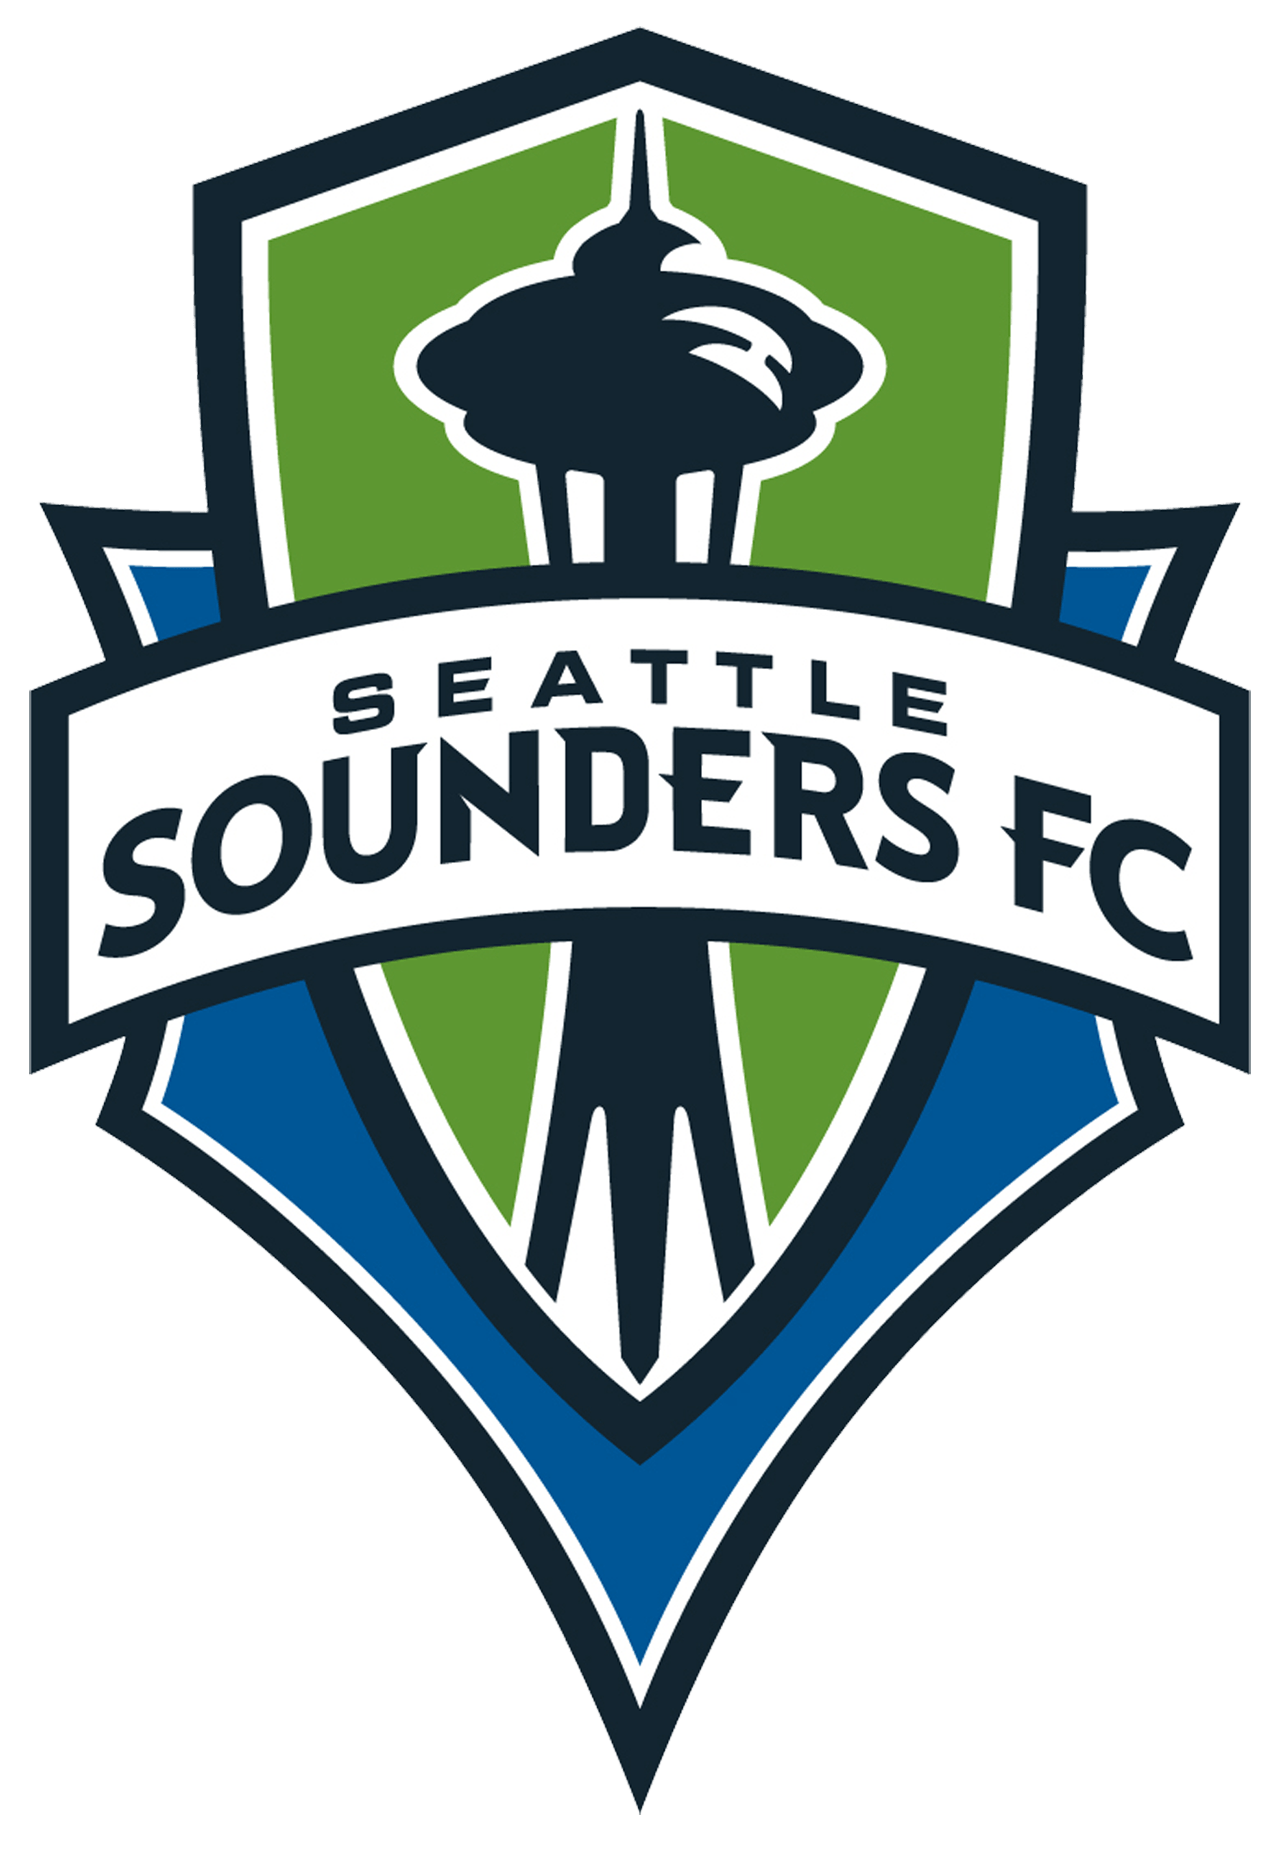 seattle sounders logo fc logo png wallpaper, Football Picture